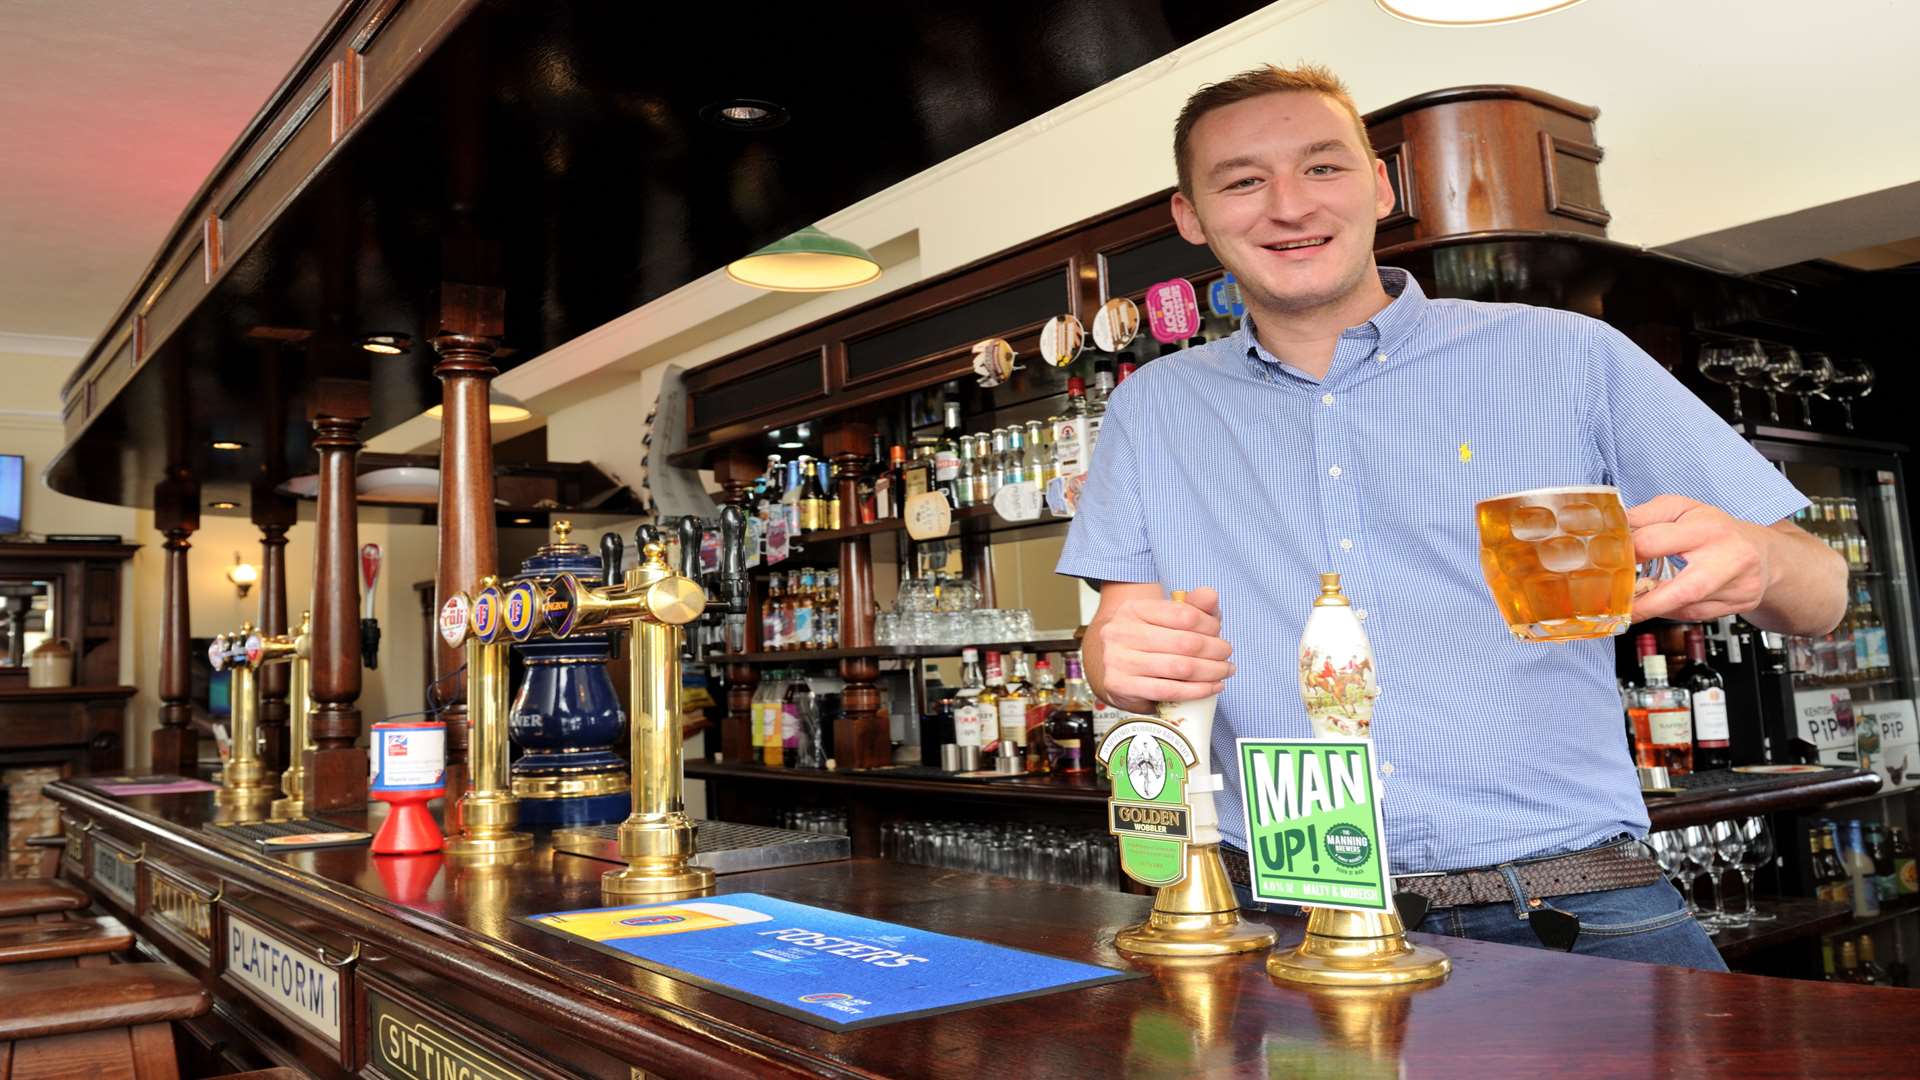 Calum Darcy says he plans to expand the selection of ales